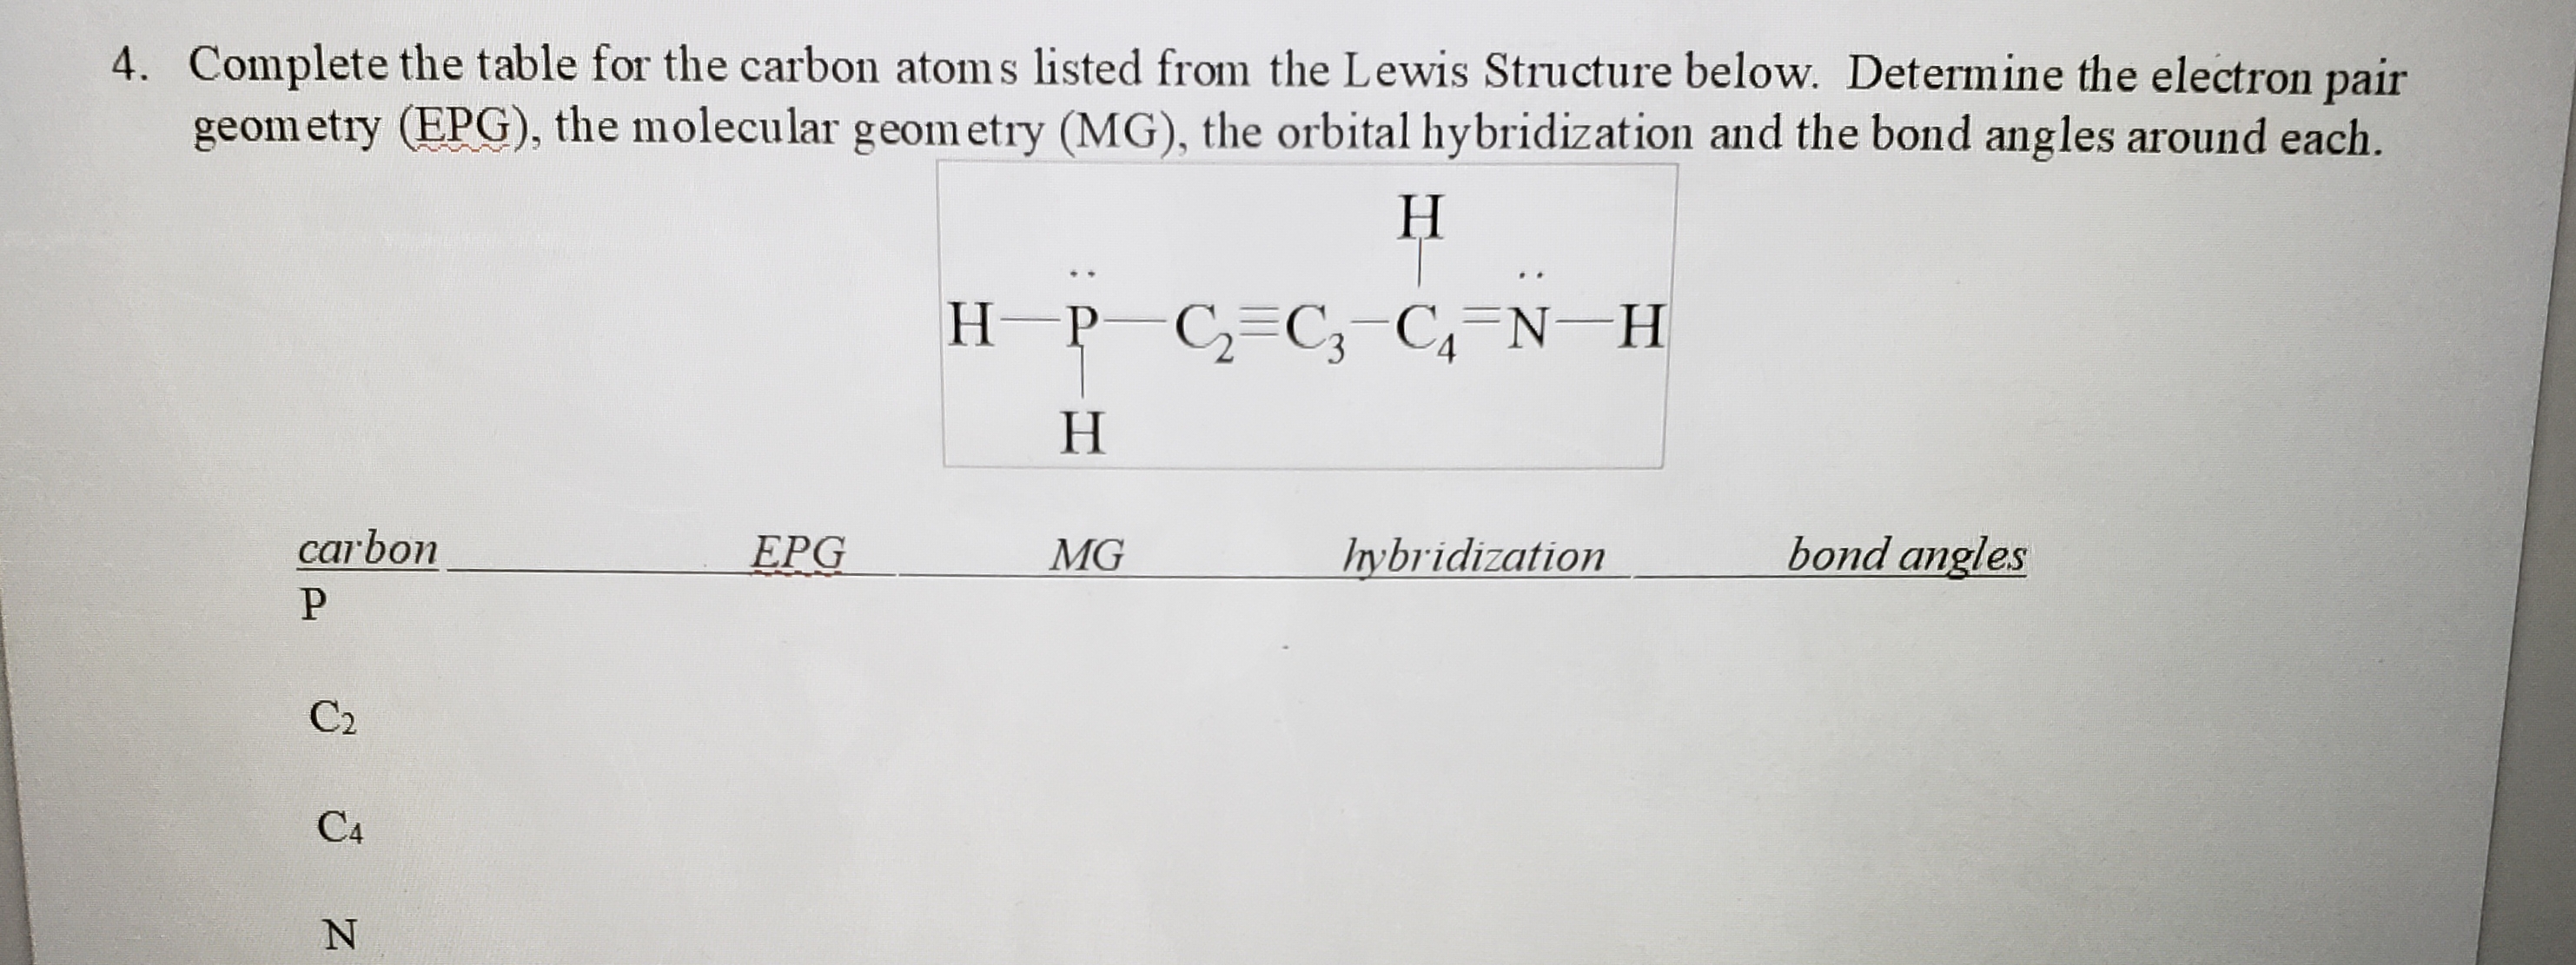 4. Complete the table for the carbon atom s listed from the Lewis Structure below. Determine the electron pair
geom etry (EPG), the molecular geom etry (MG), the orbital hybridization and the bond angles around each.
Н
H-P C,=C;-C,=N-H
Н
carbon
EPG
MG
Irybridization
bond angles
C2
C4
